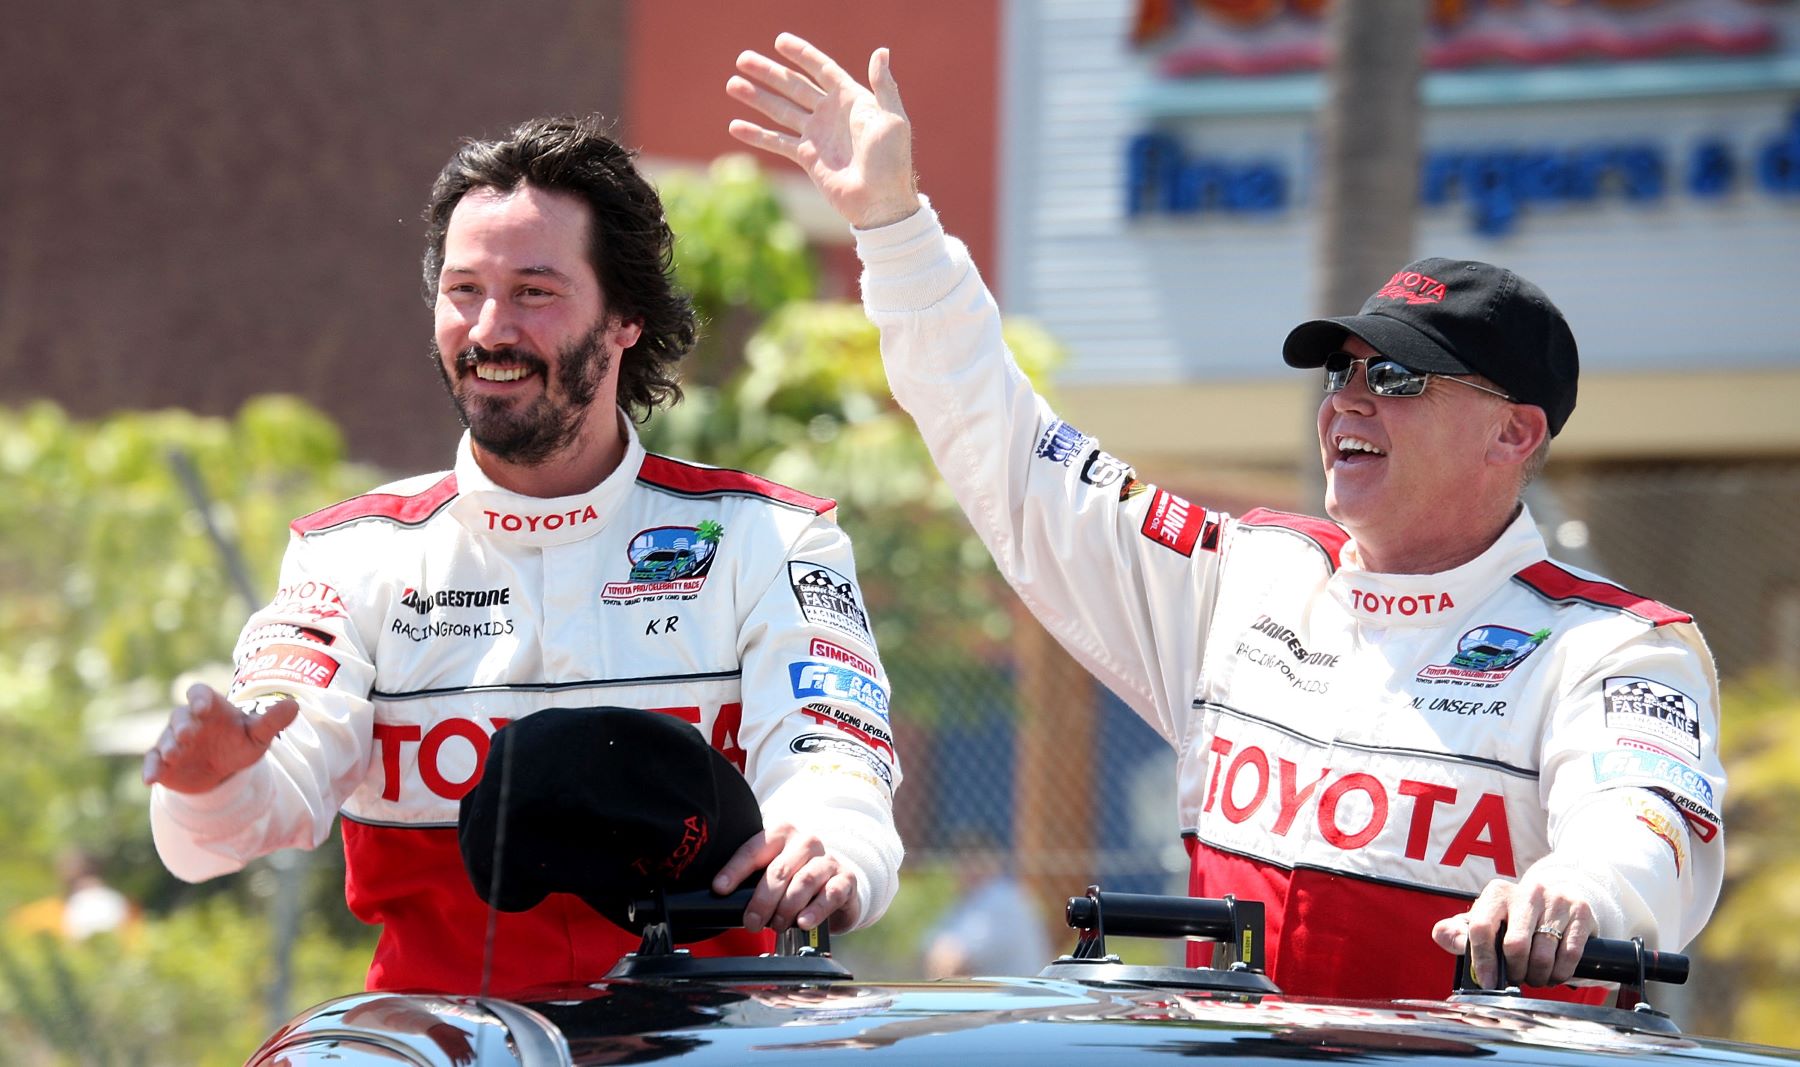 Keanu Reeves and race car driver Al Unser Jr. after winning a celebrity race at the Toyota Grand Prix